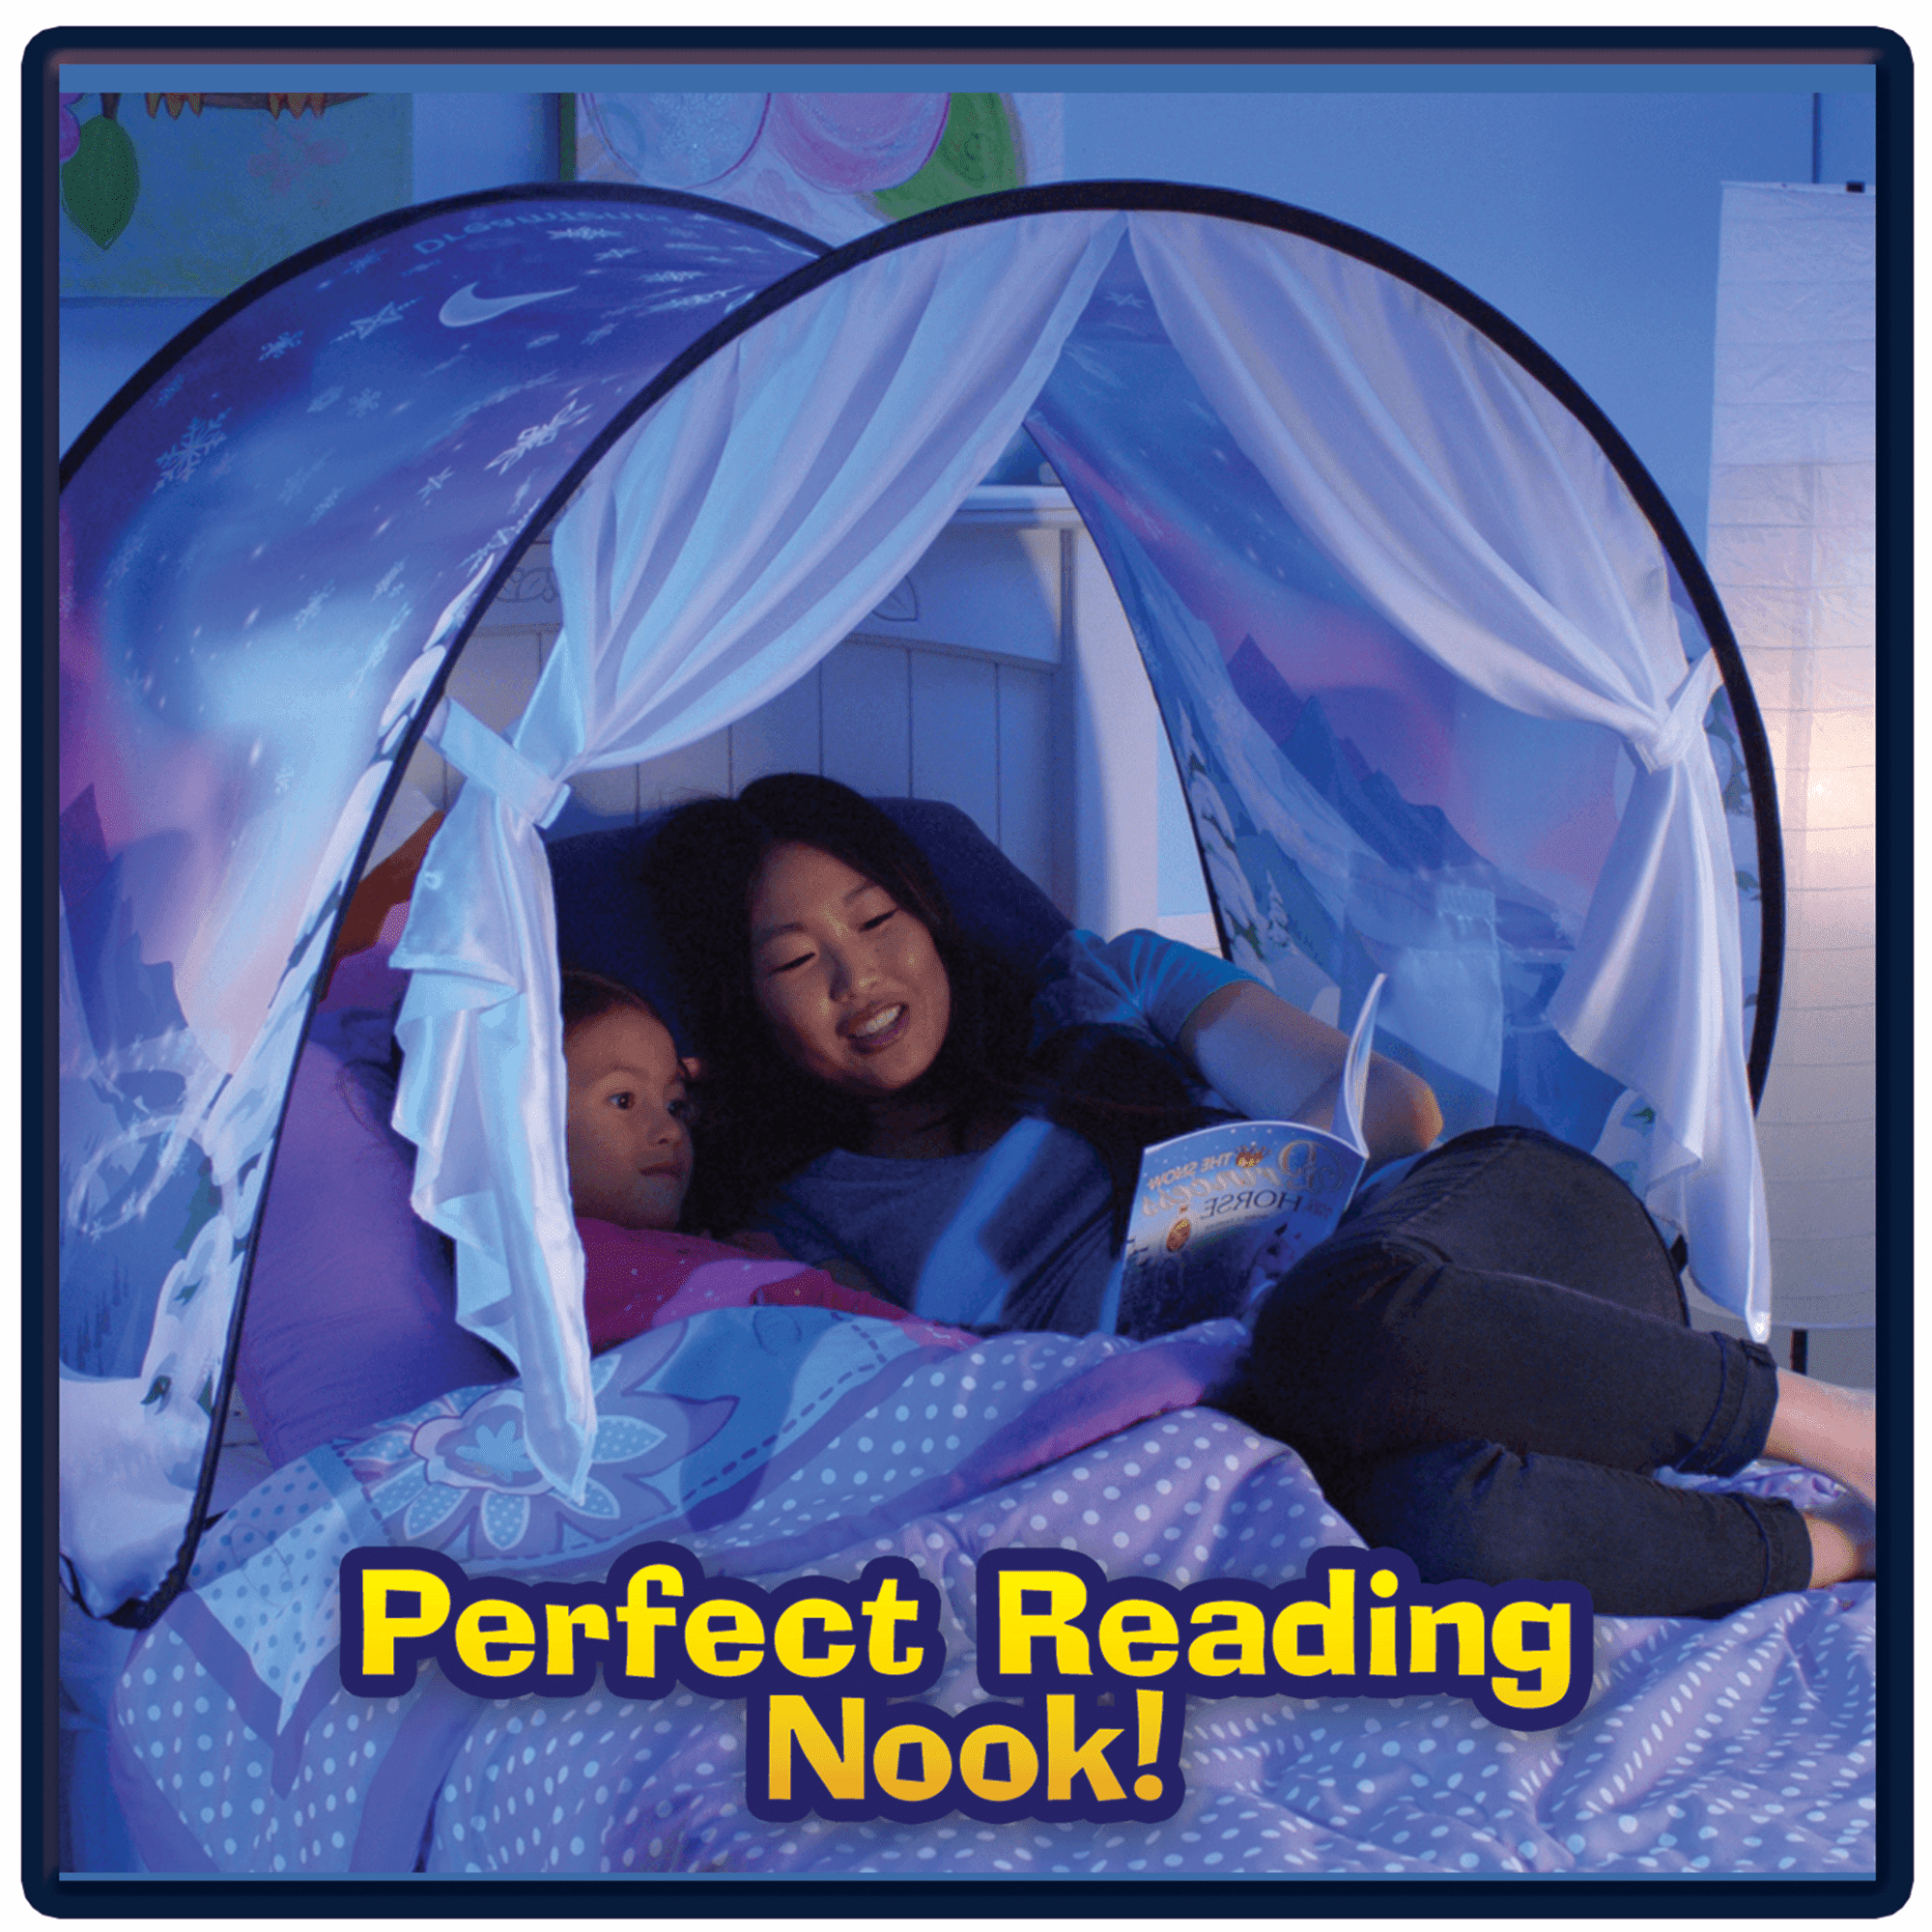 Pop Up Bed Tent  Play Tent B Dream Bed Tents for kids Foldable Magic Play Tent 